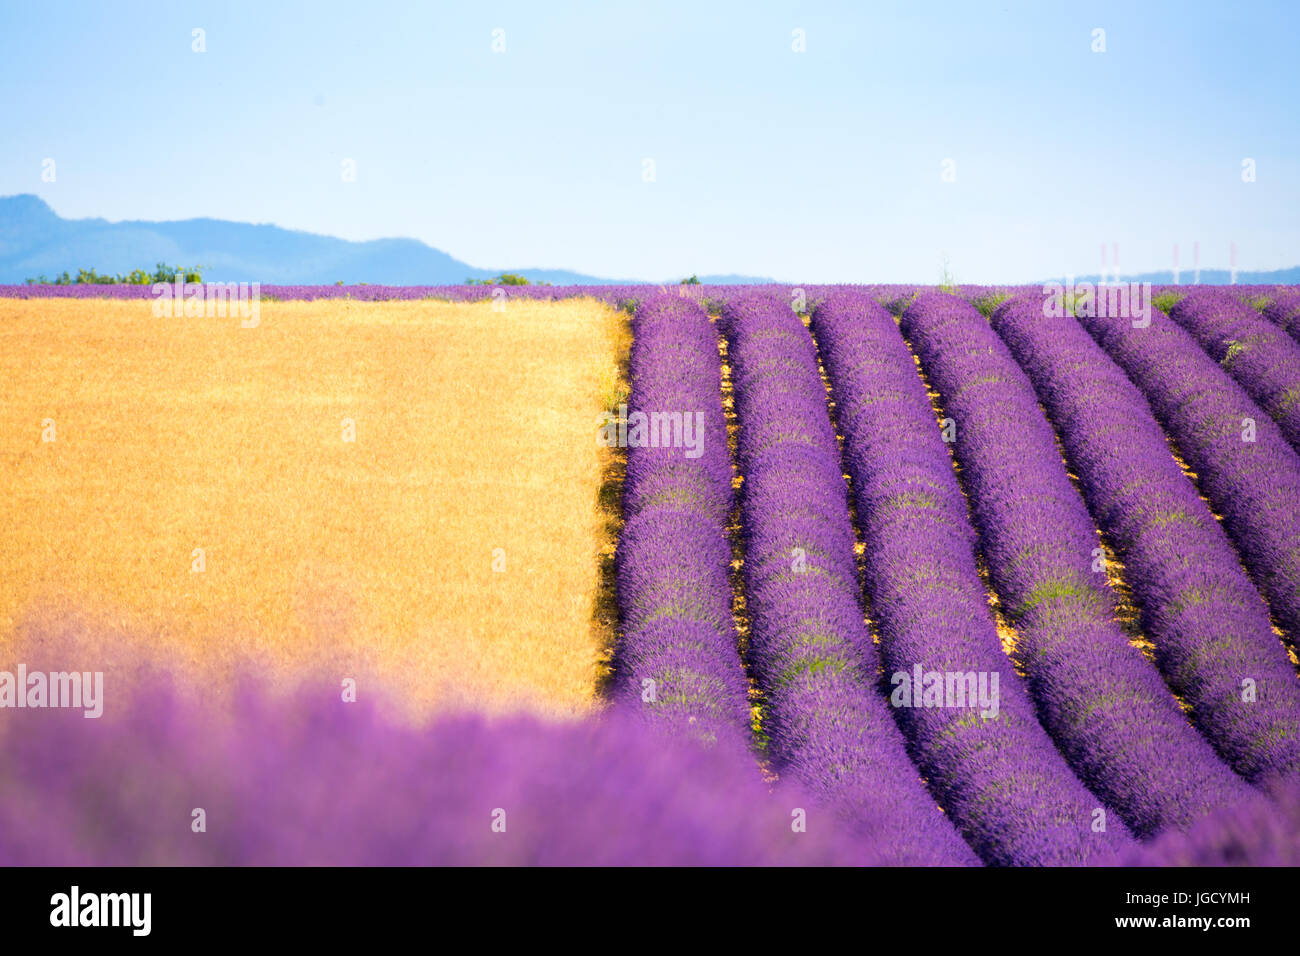 Valensole Plateau, Provence, France. Lavender fields in bloom Stock Photo